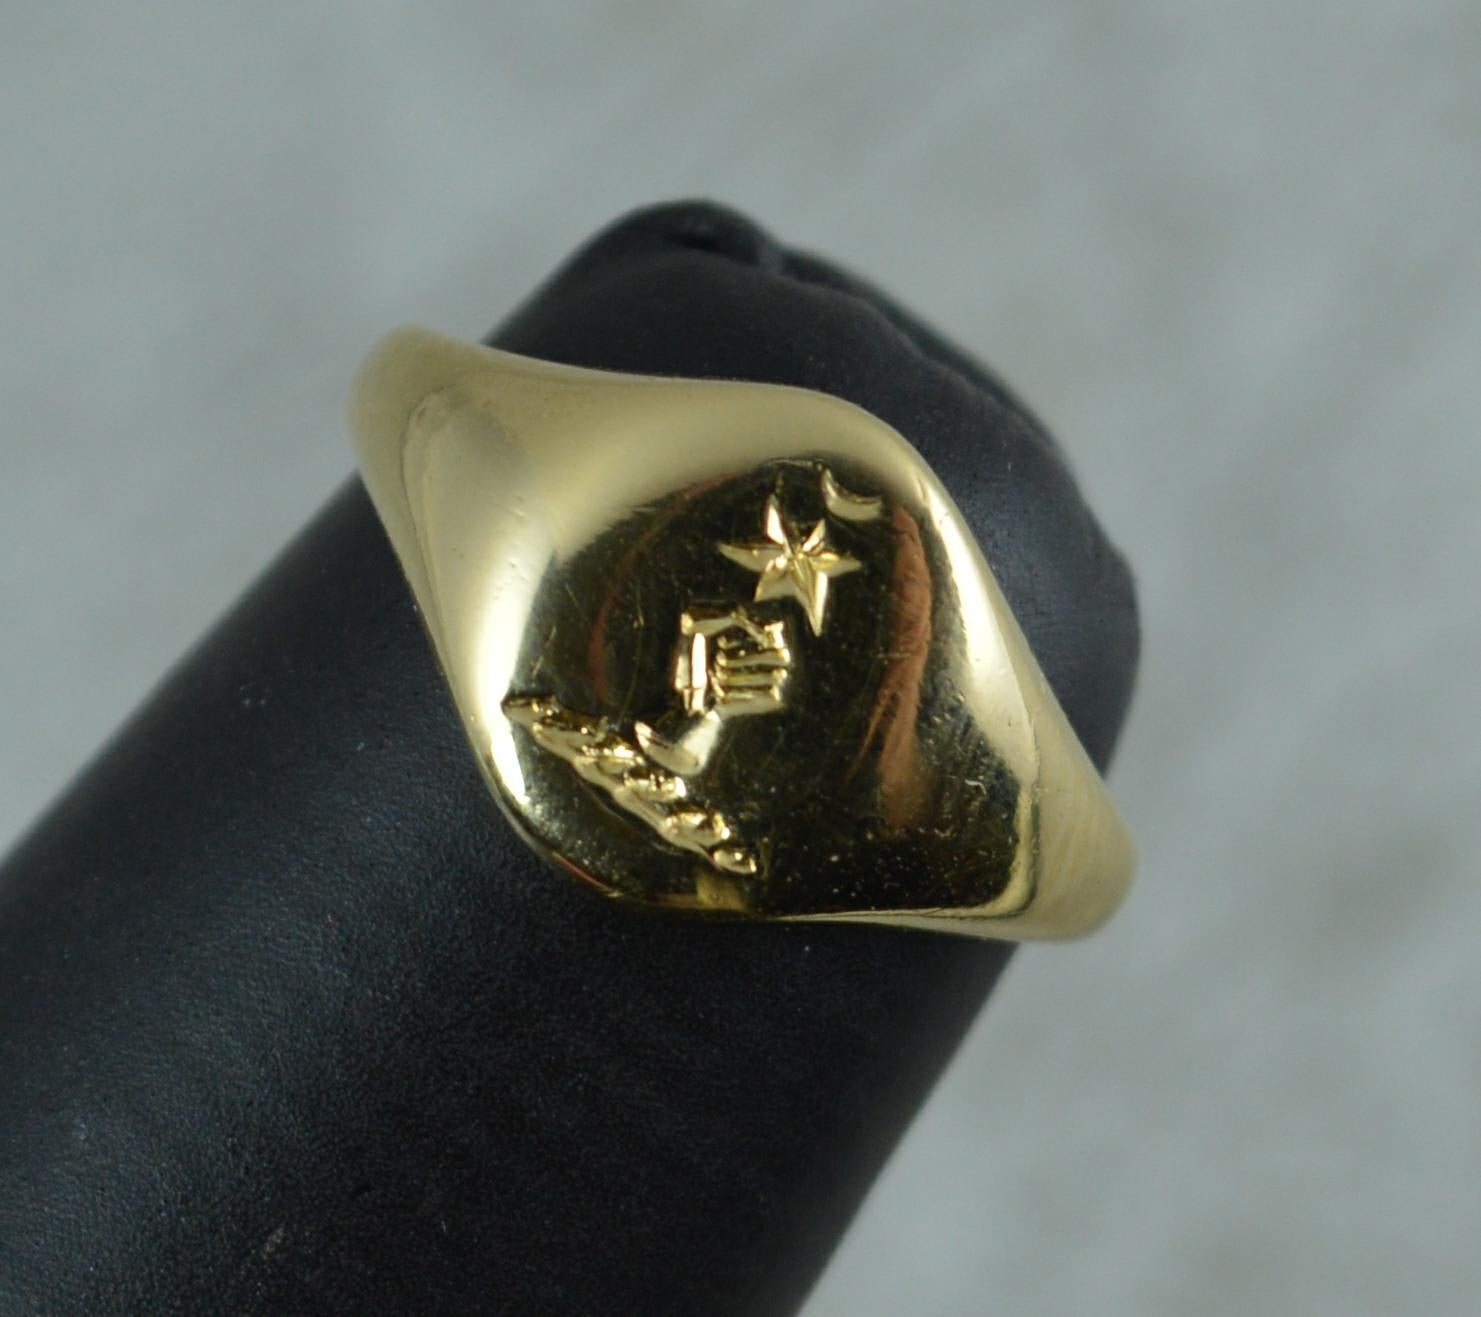 Antique 18 Carat Gold and Clenched Fist and Star Intaglio Seal Signet Ring 8